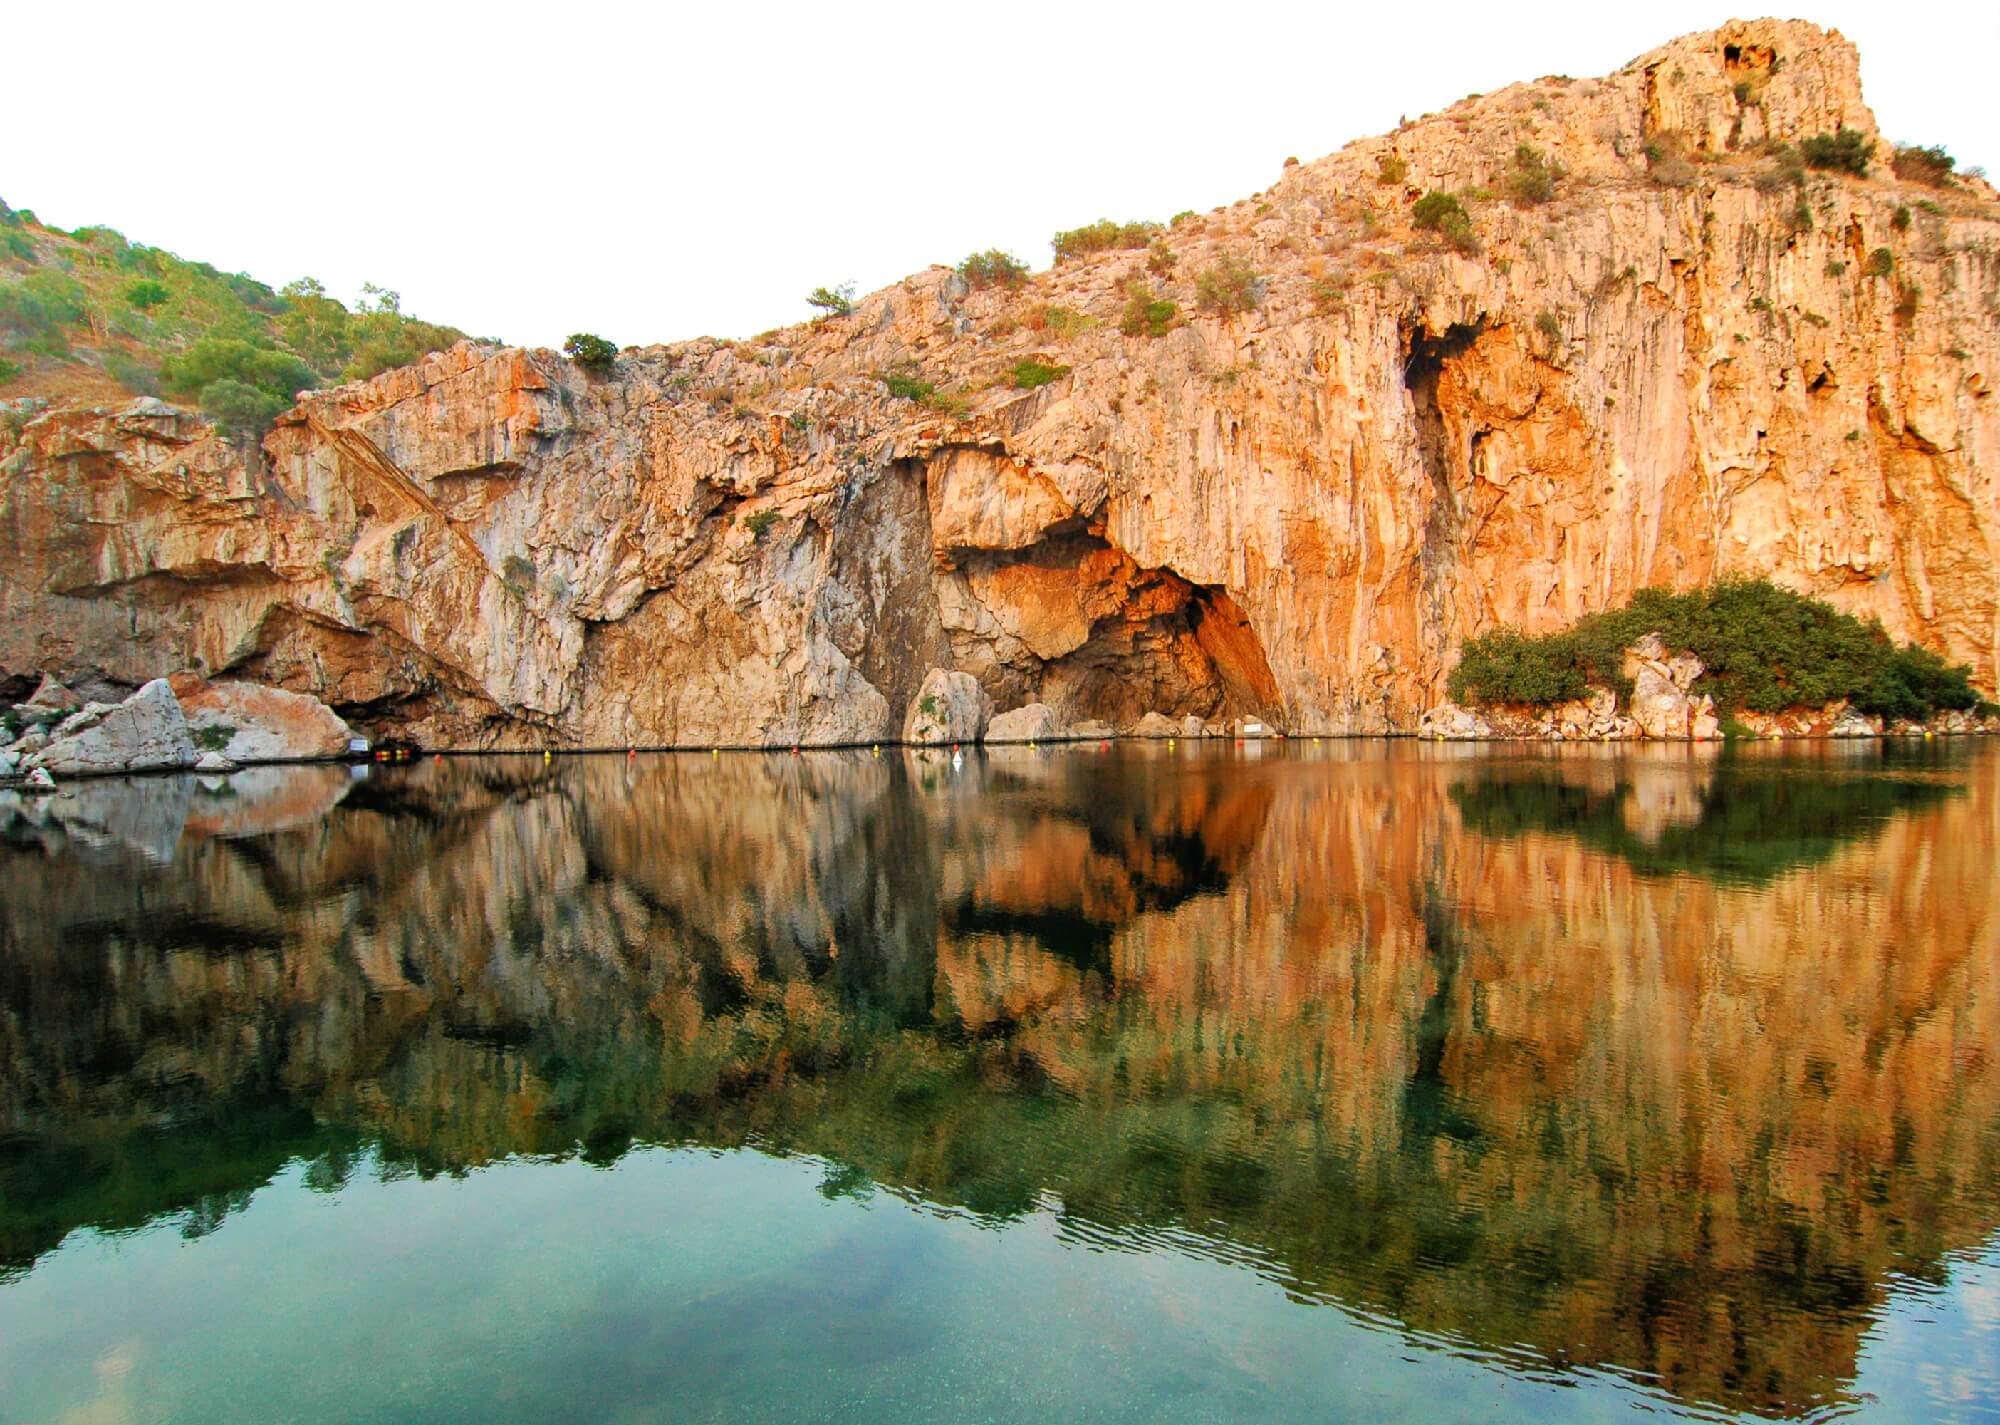 Visiting Lake Vouliagmeni may be the perfect way to end 3 days in Athens!